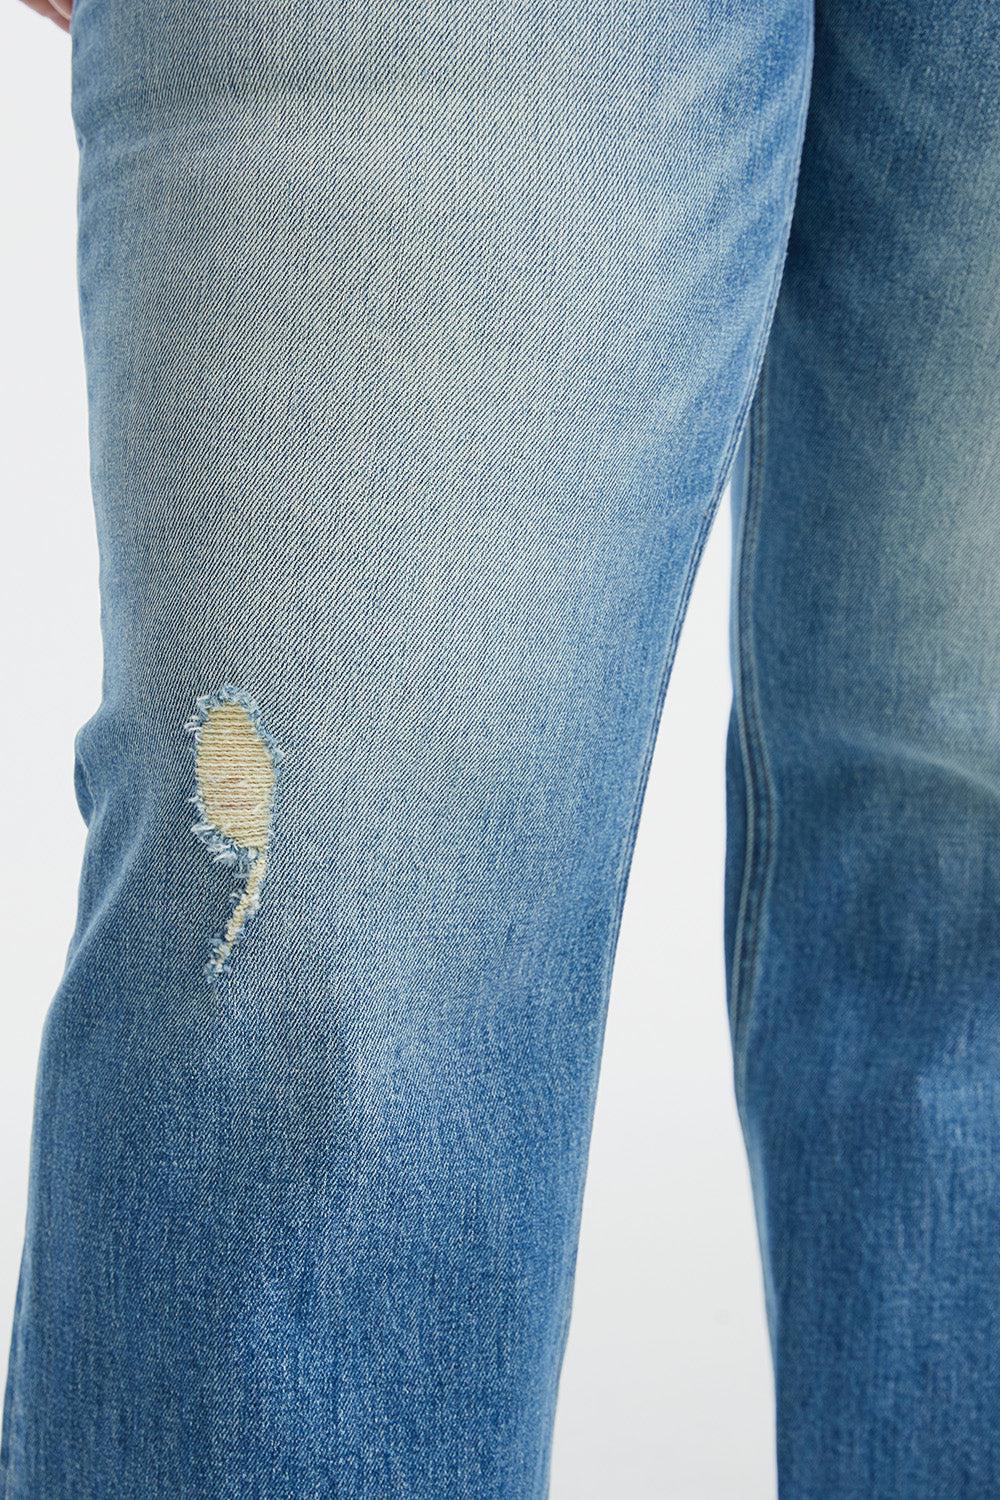 a person wearing a pair of ripped jeans